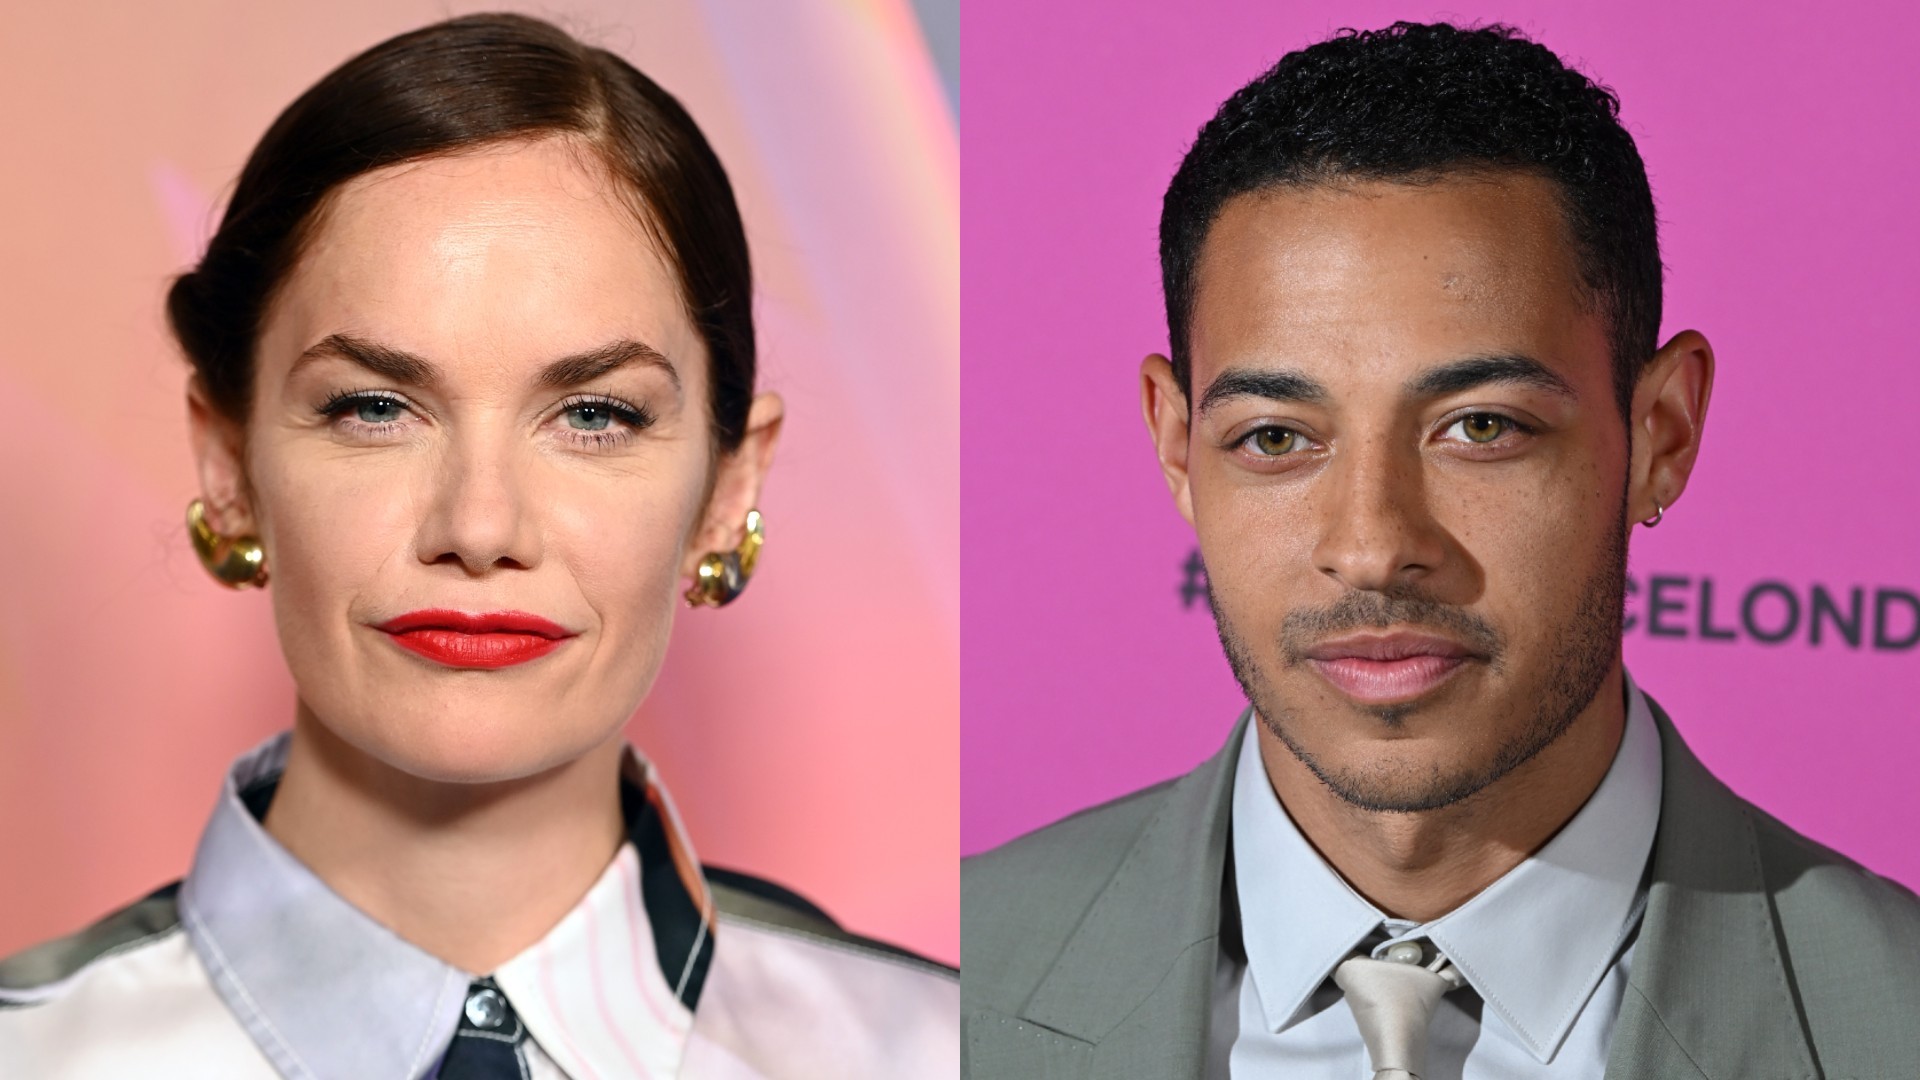 Casting News: Ruth Wilson and Daryl McCormack to Lead Thriller Series 'The Woman in The Wall'